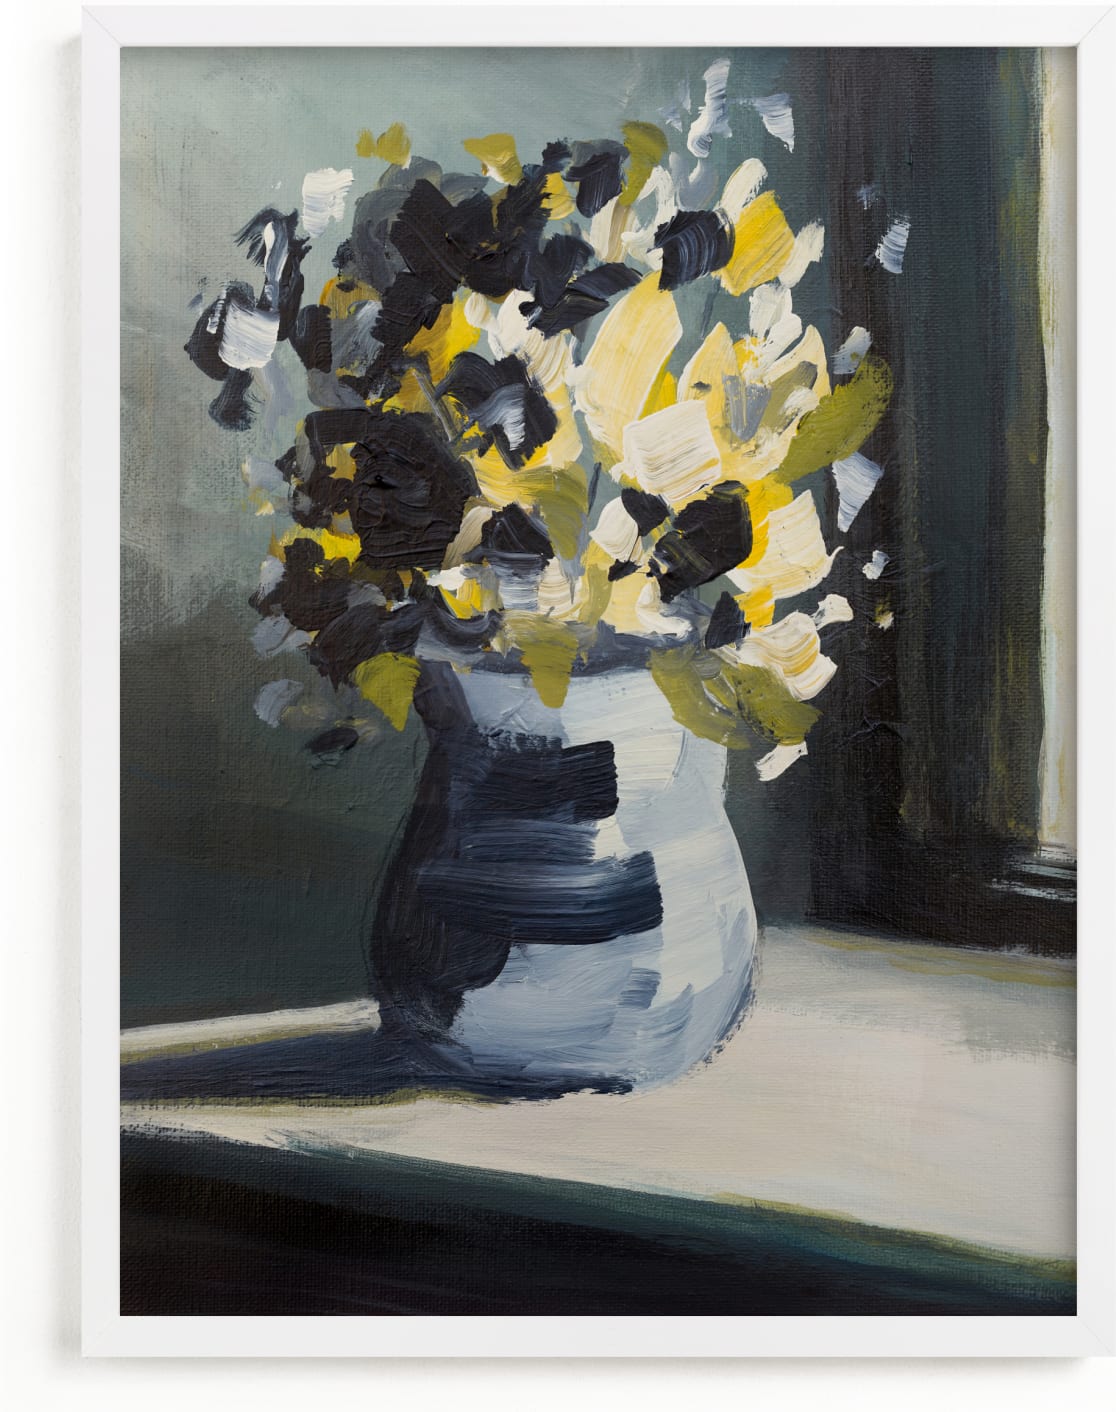 This is a yellow art by Jen Florentine called A Floral Mood.